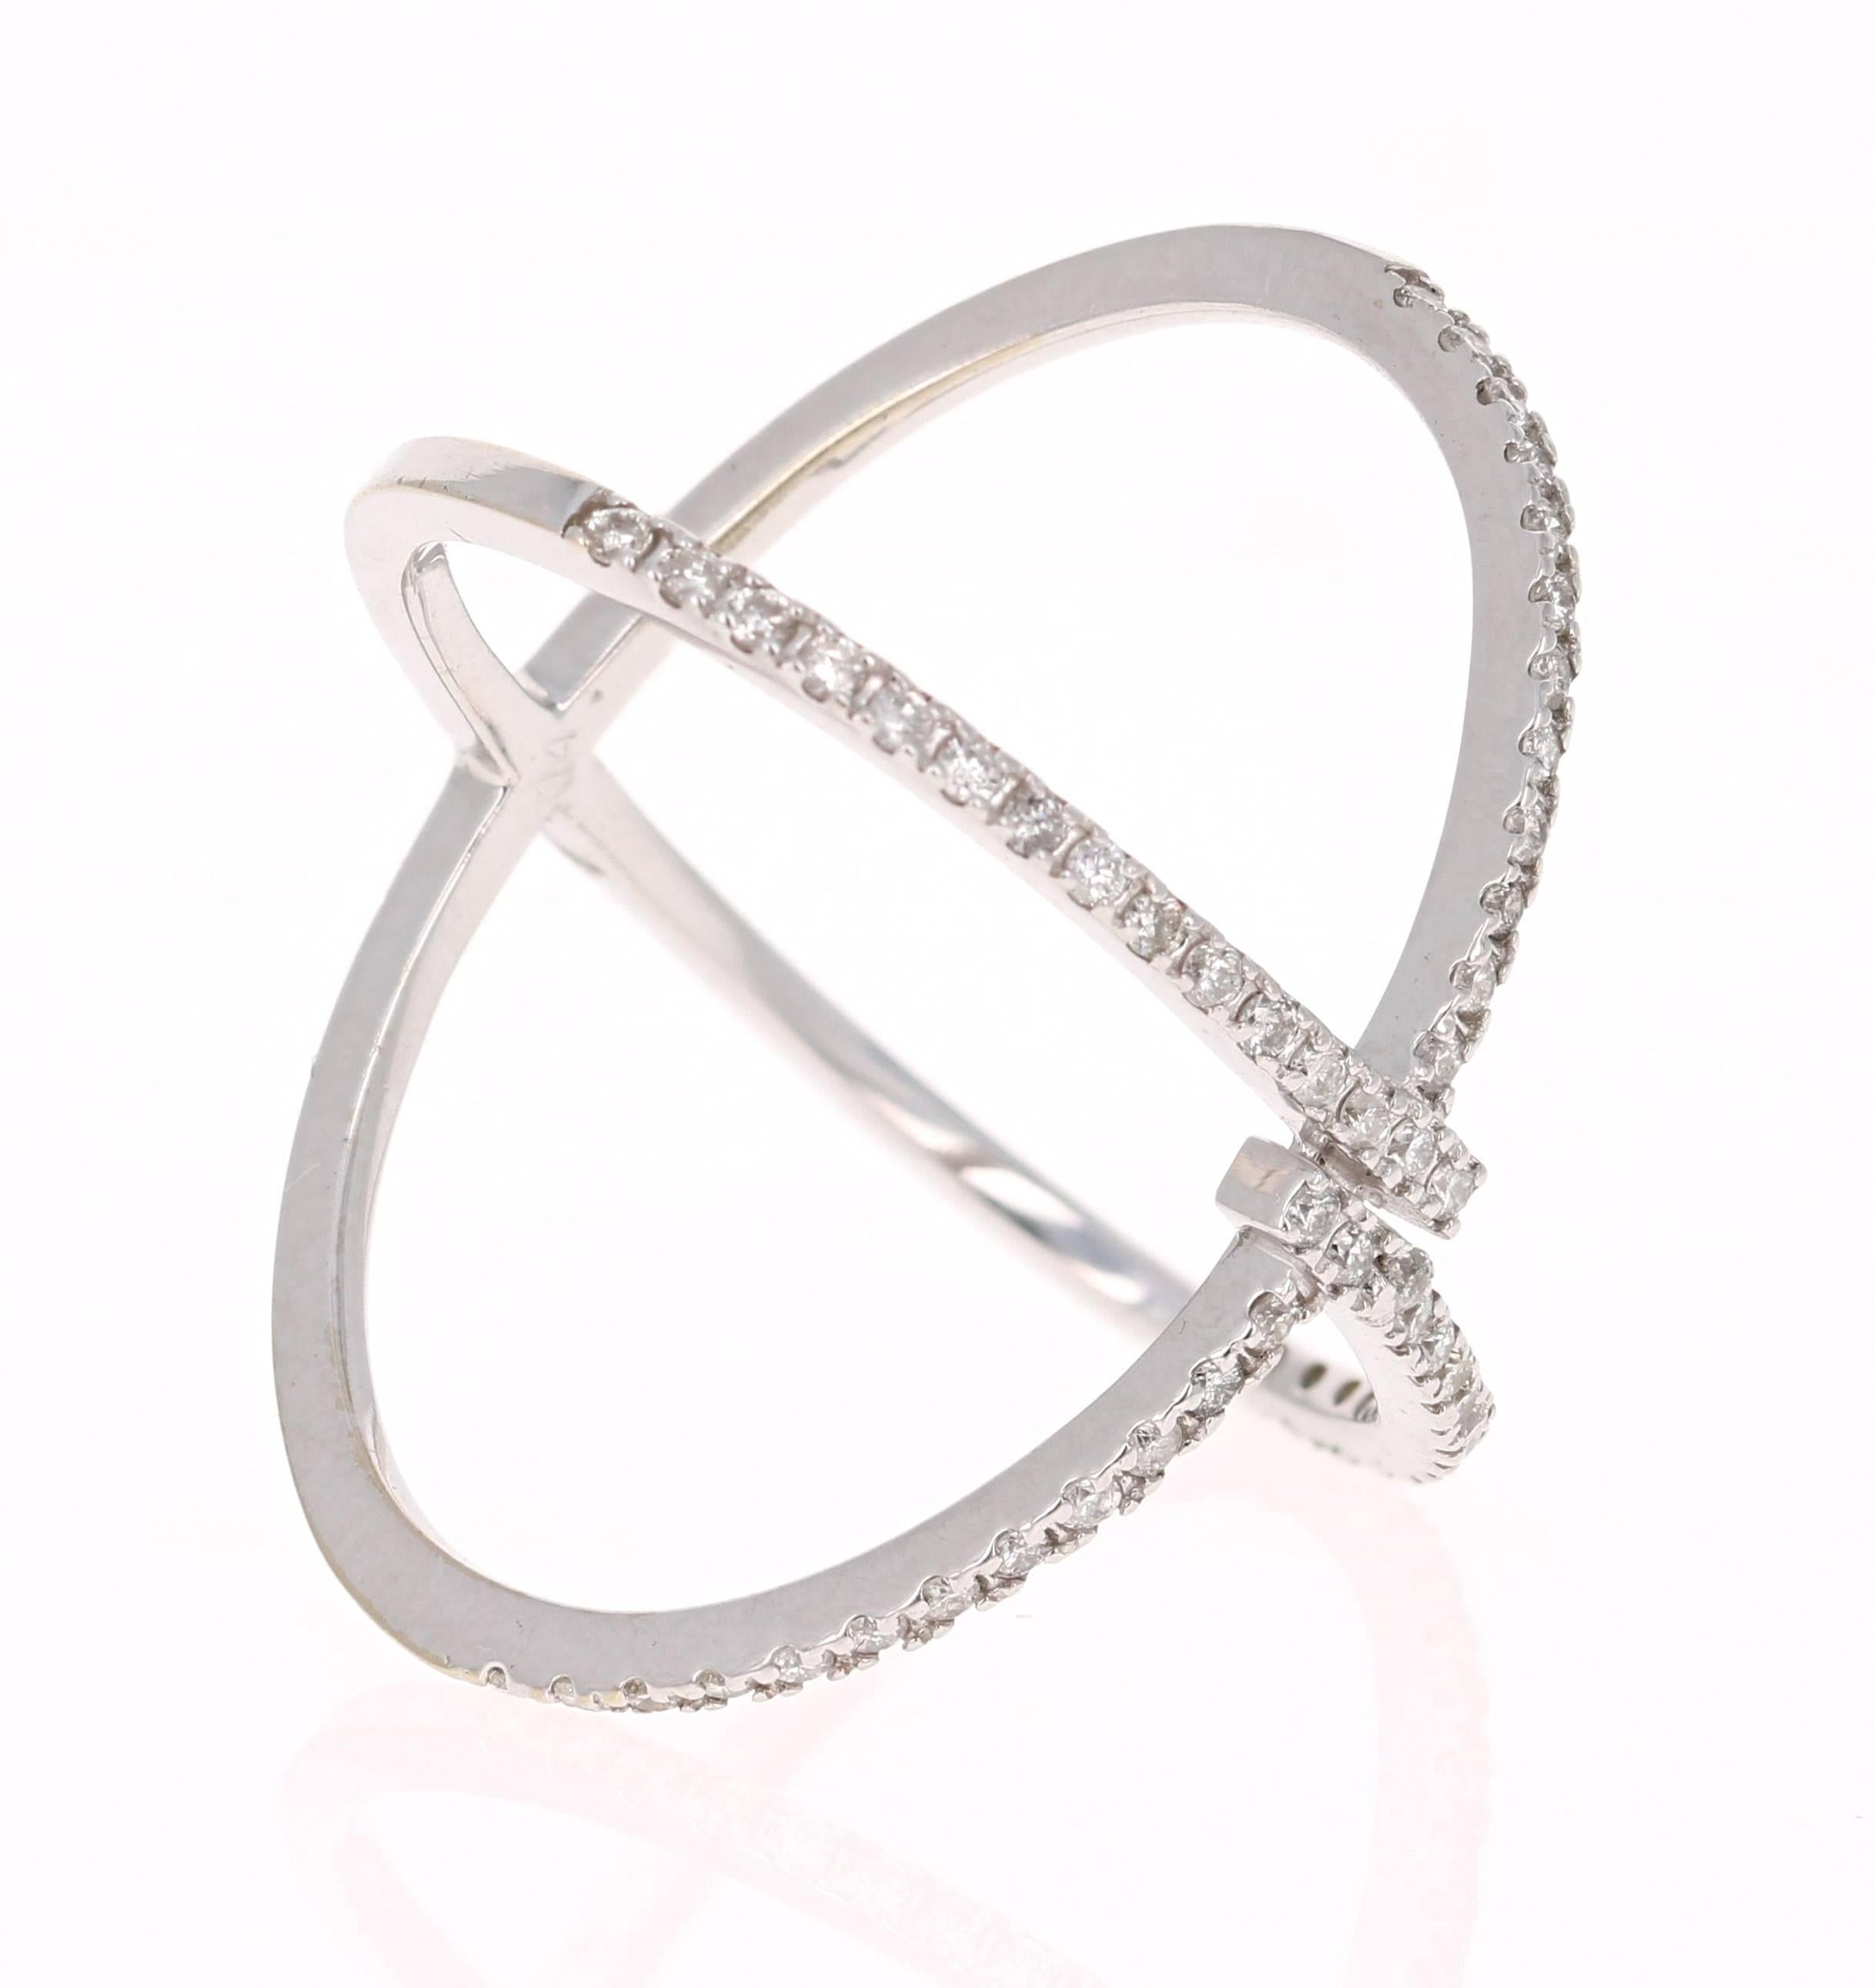 A simple cocktail/statement ring with a criss-cross setting! Very much on trend with the modern day rings. A ring that screams #girlpower #bossbabe #bosslady for the independent and strong! 
Great as an everyday wear and to wear with other rings on